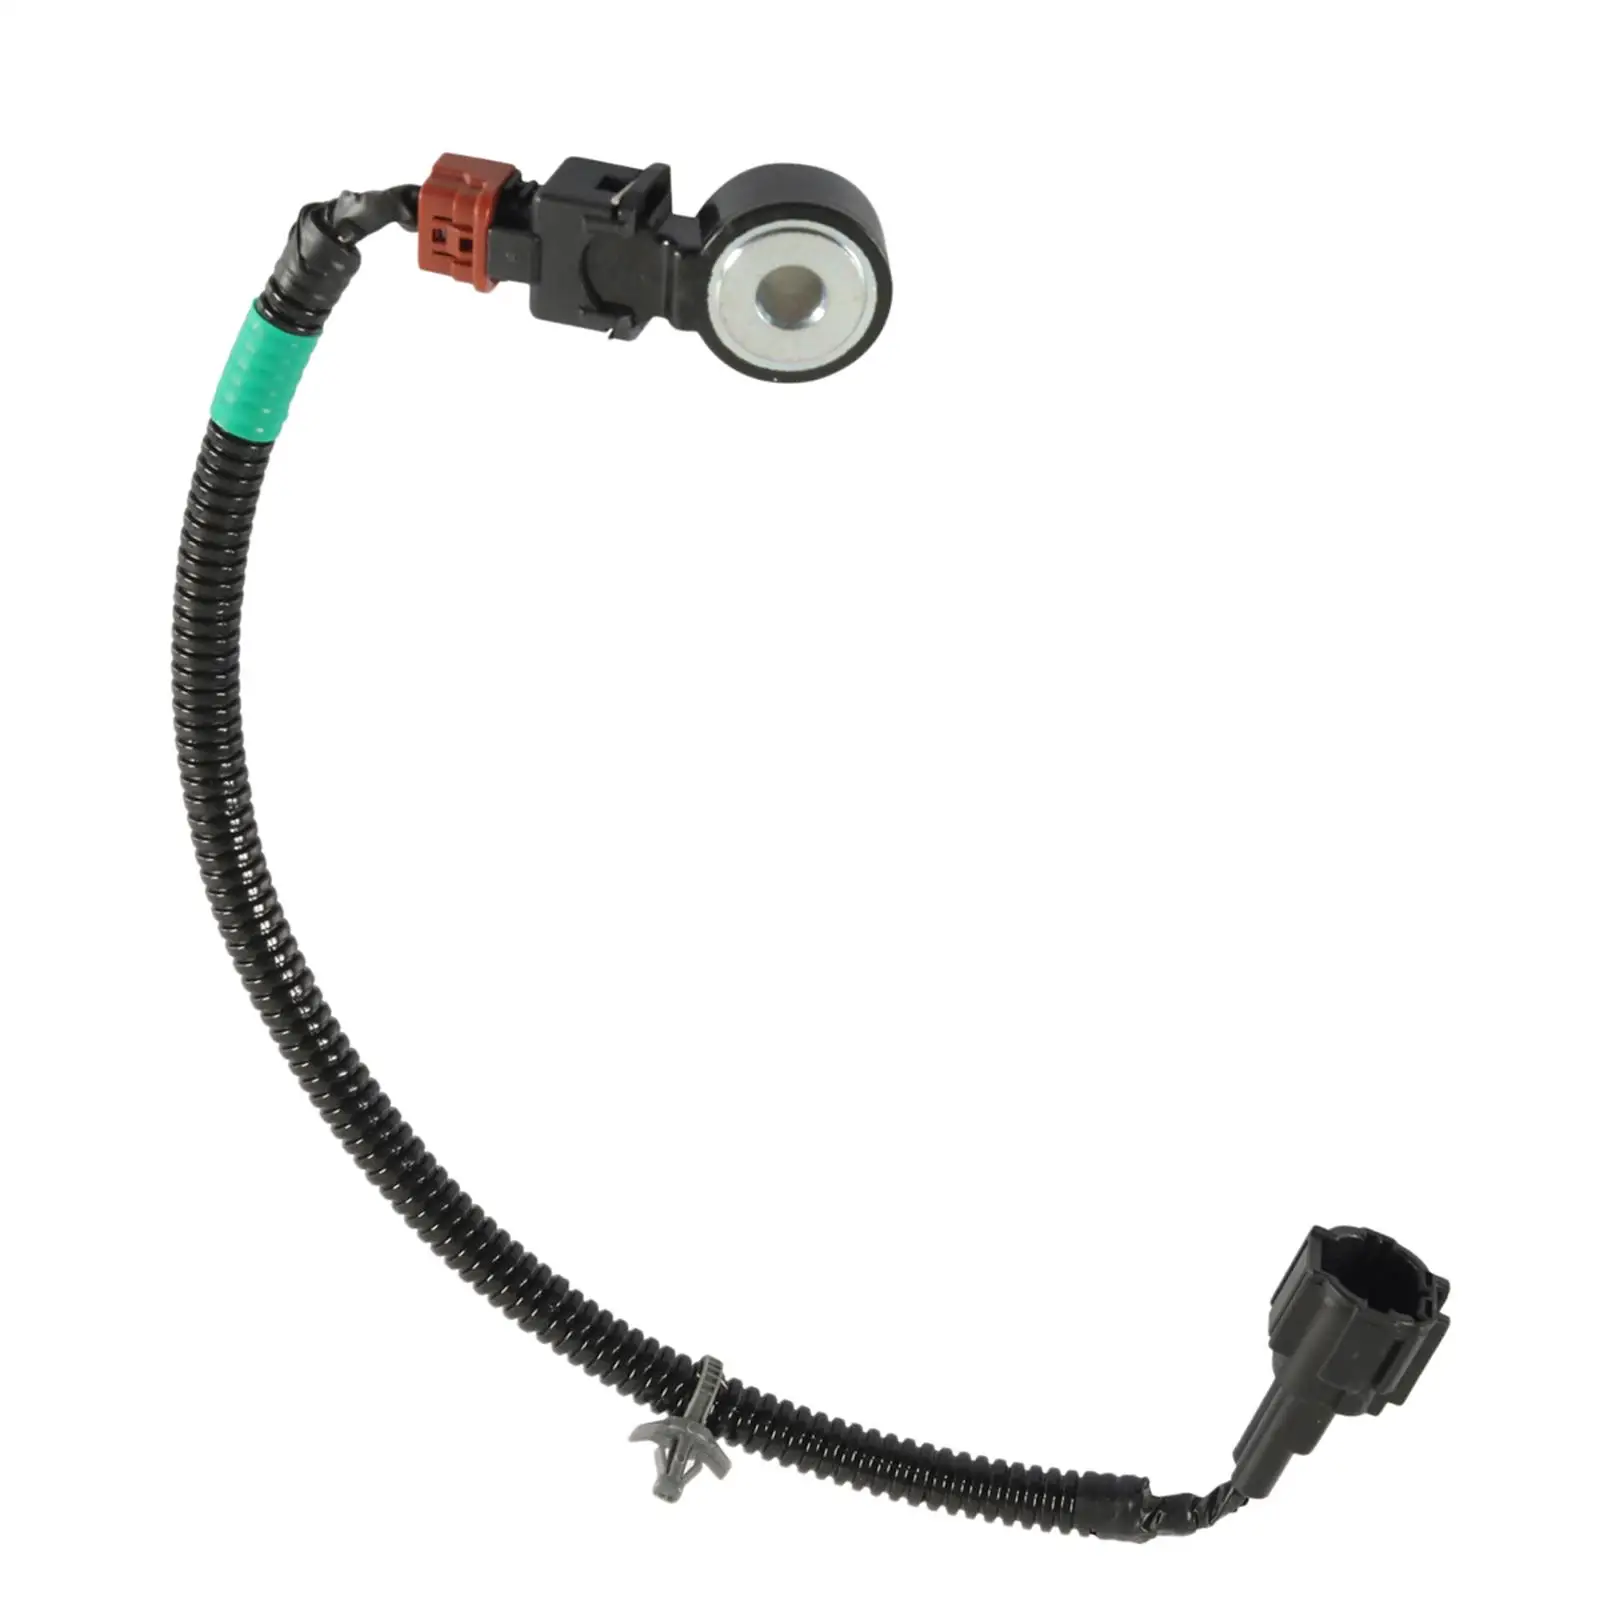 Engine Knock Sensor and Wire Harness 2407931U01 for Nissan Parts Replace Easy to Install Accessories